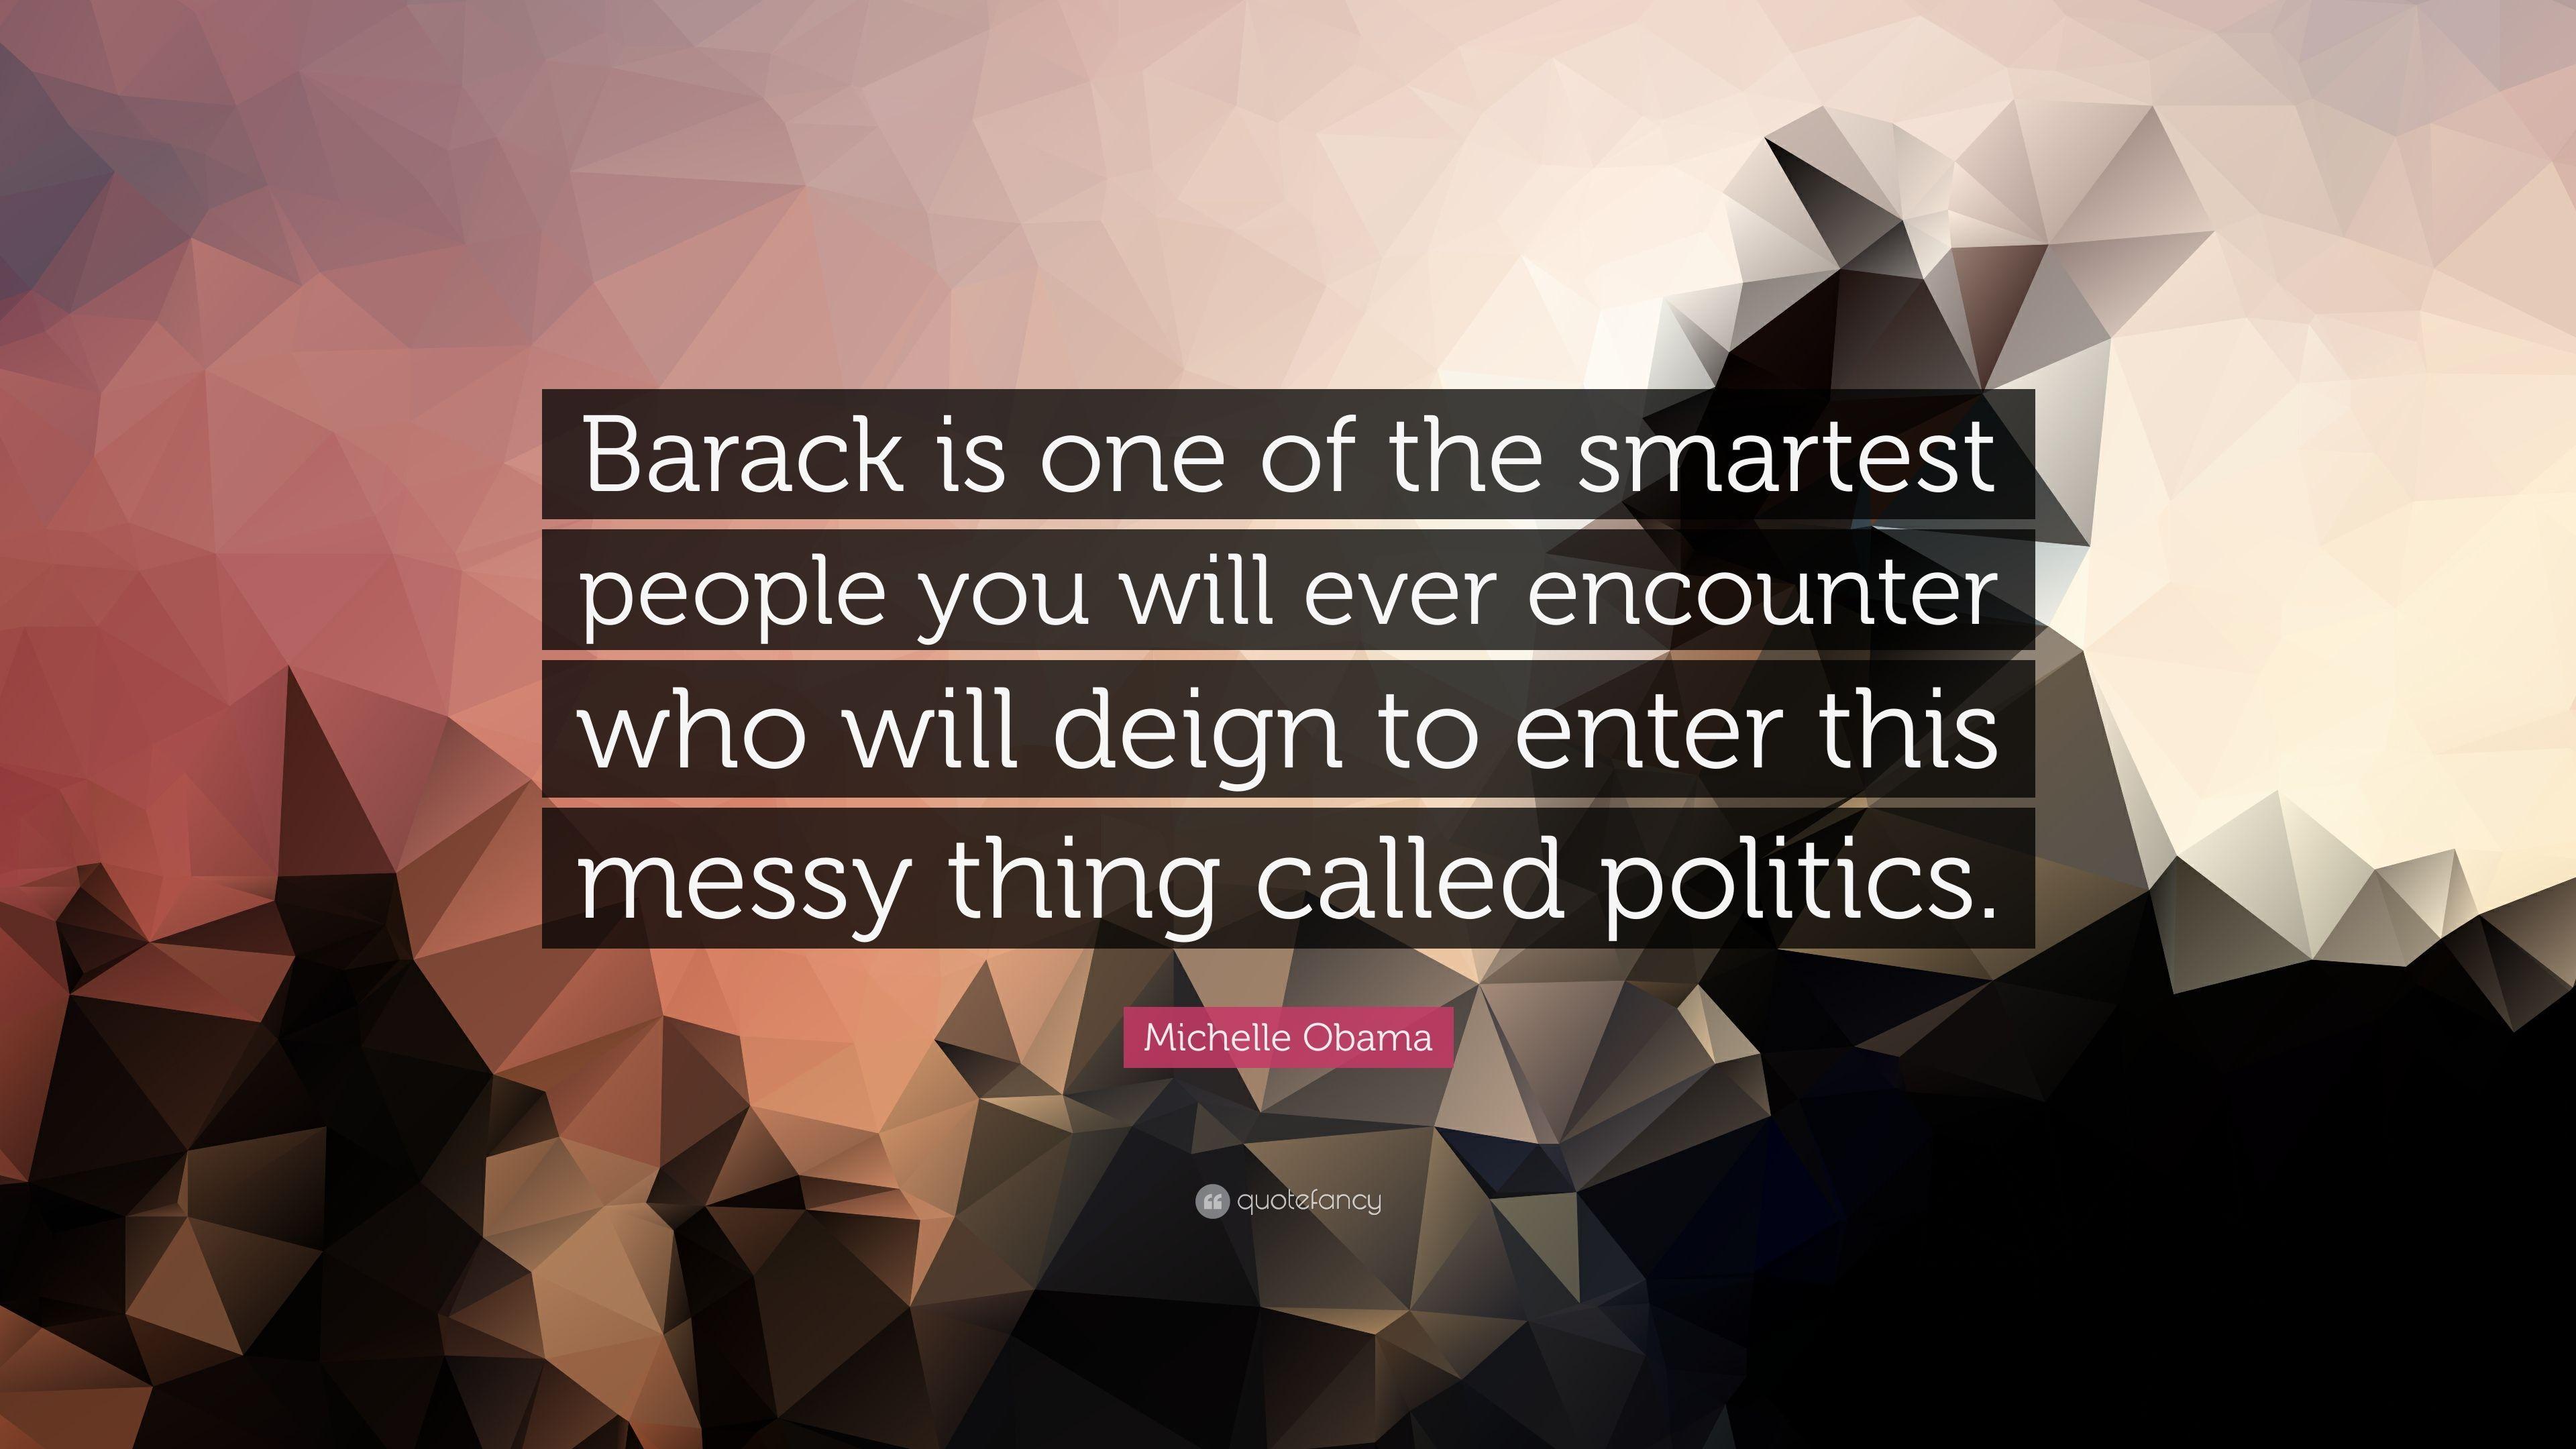 Michelle Obama Quote: “Barack is one of the smartest people you